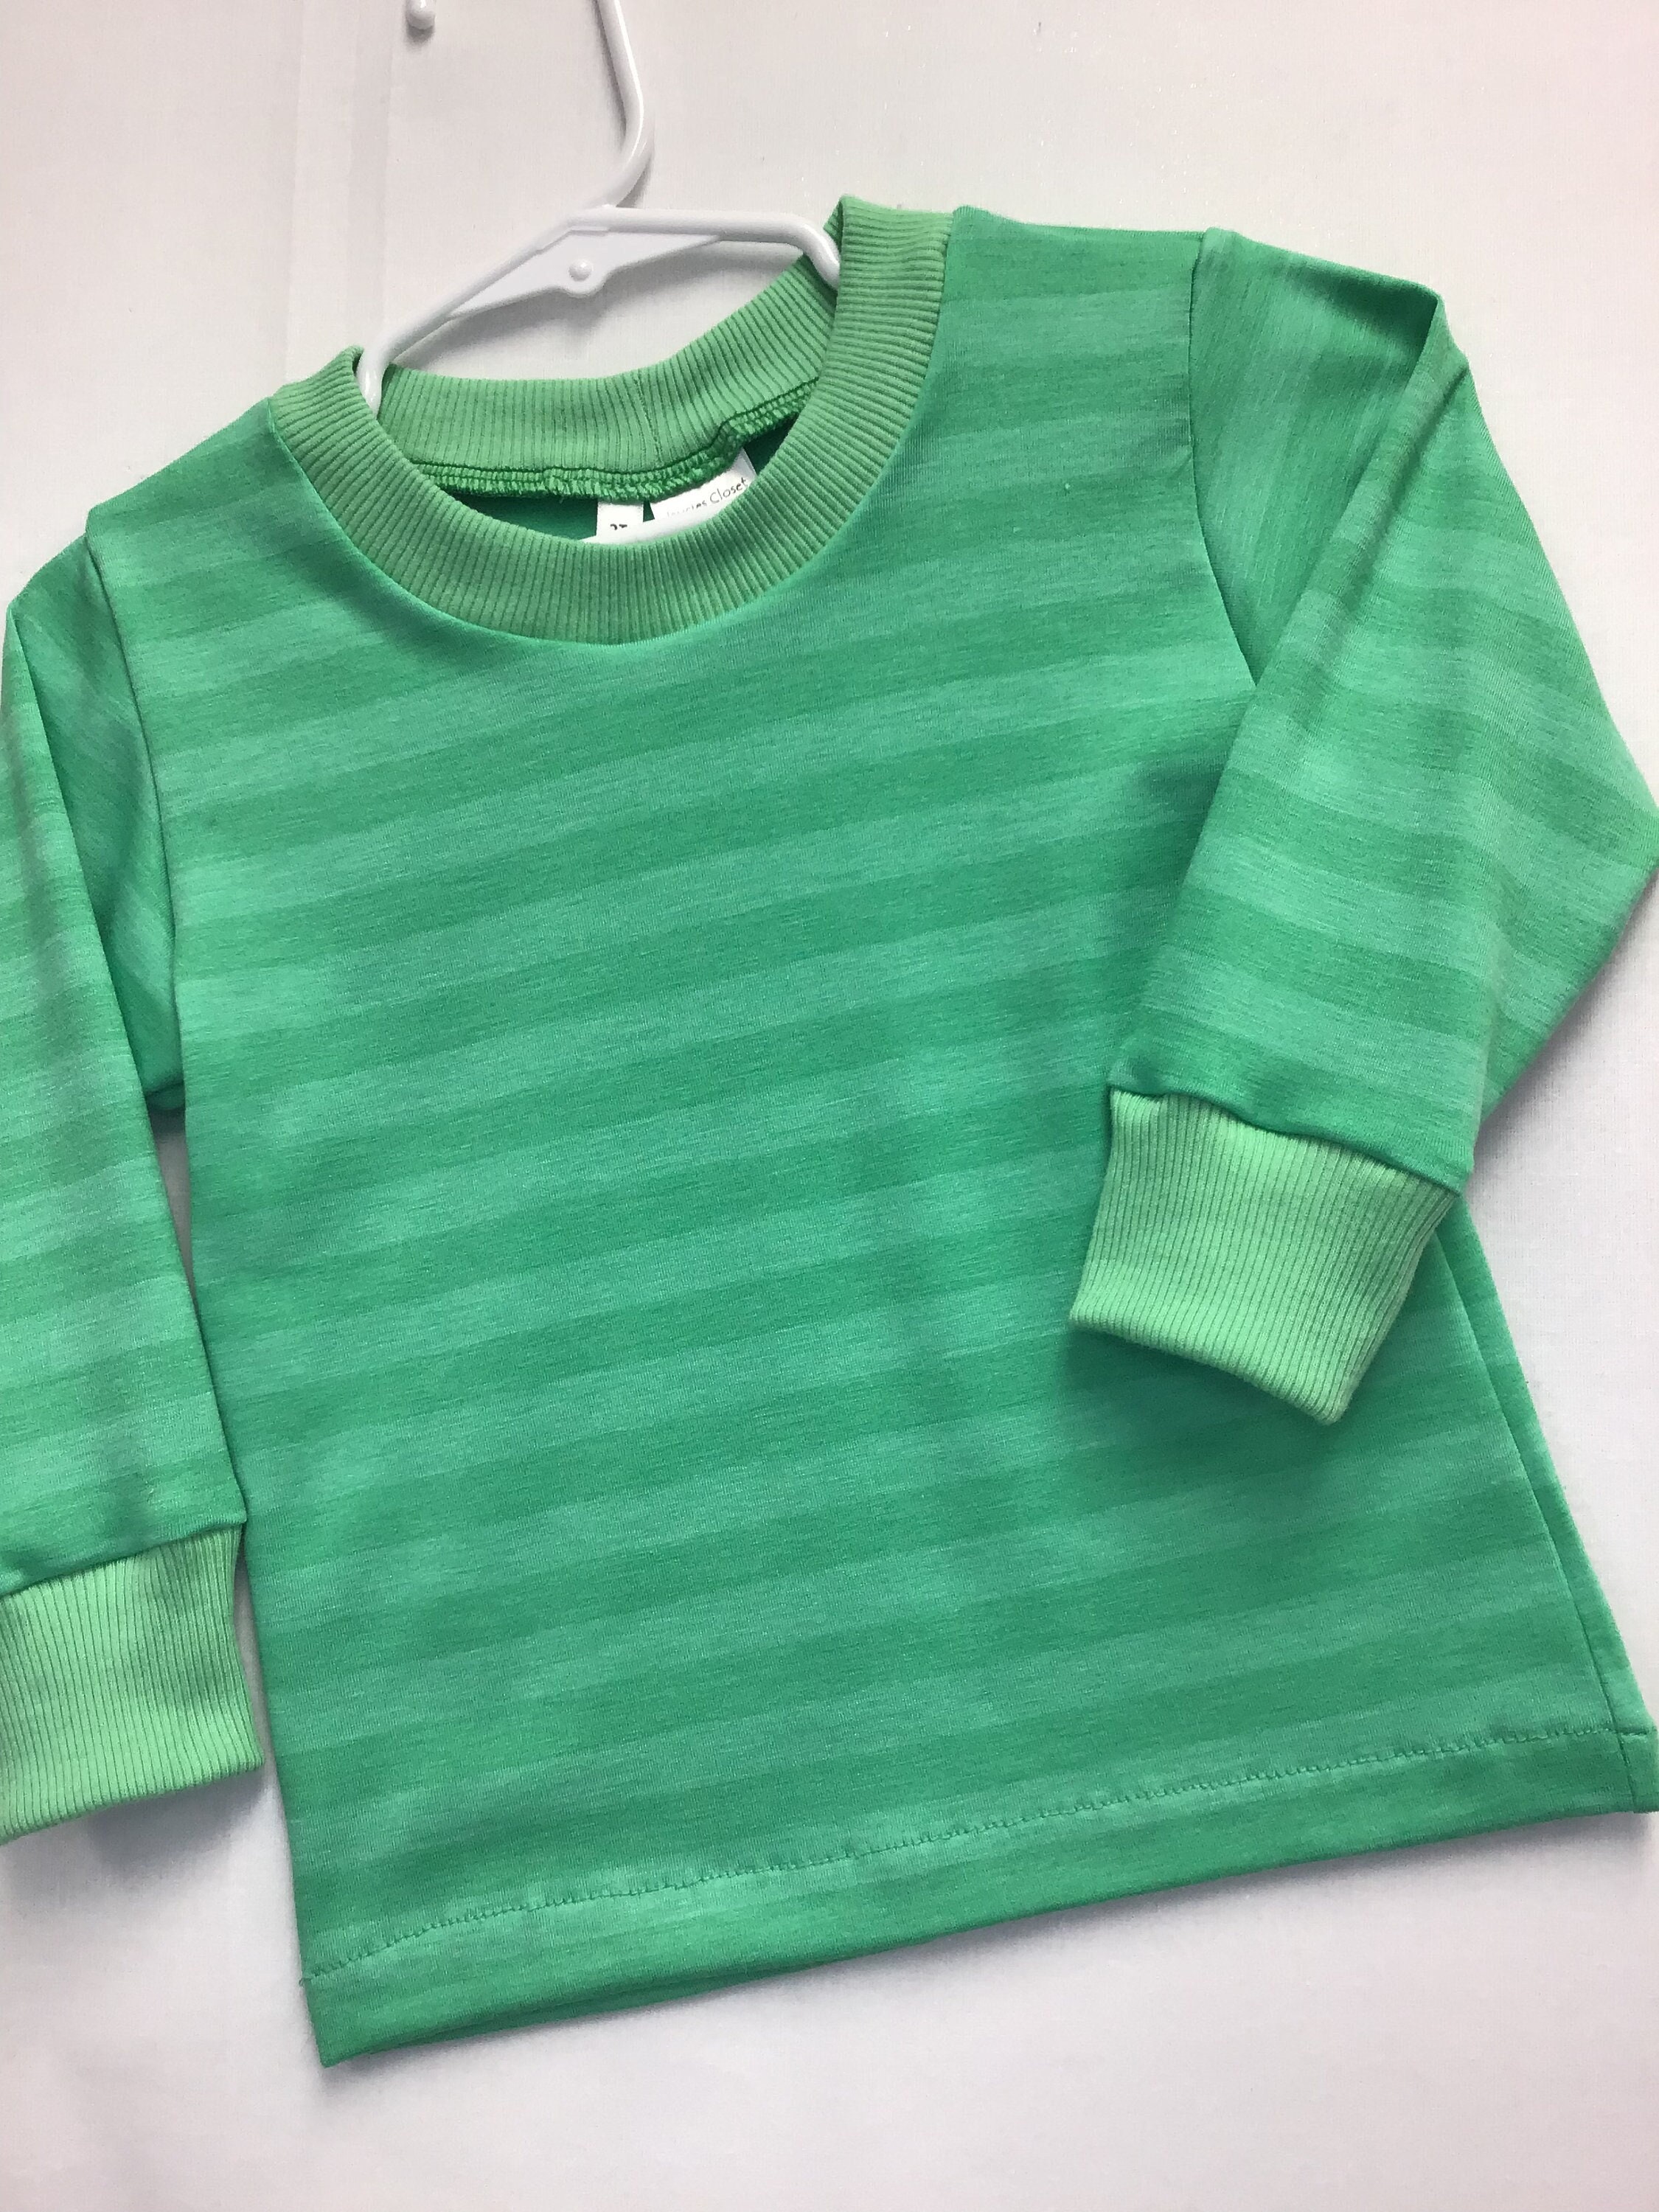 Two Tone Striped T-shirt, and - Etsy Baby Toddler Green